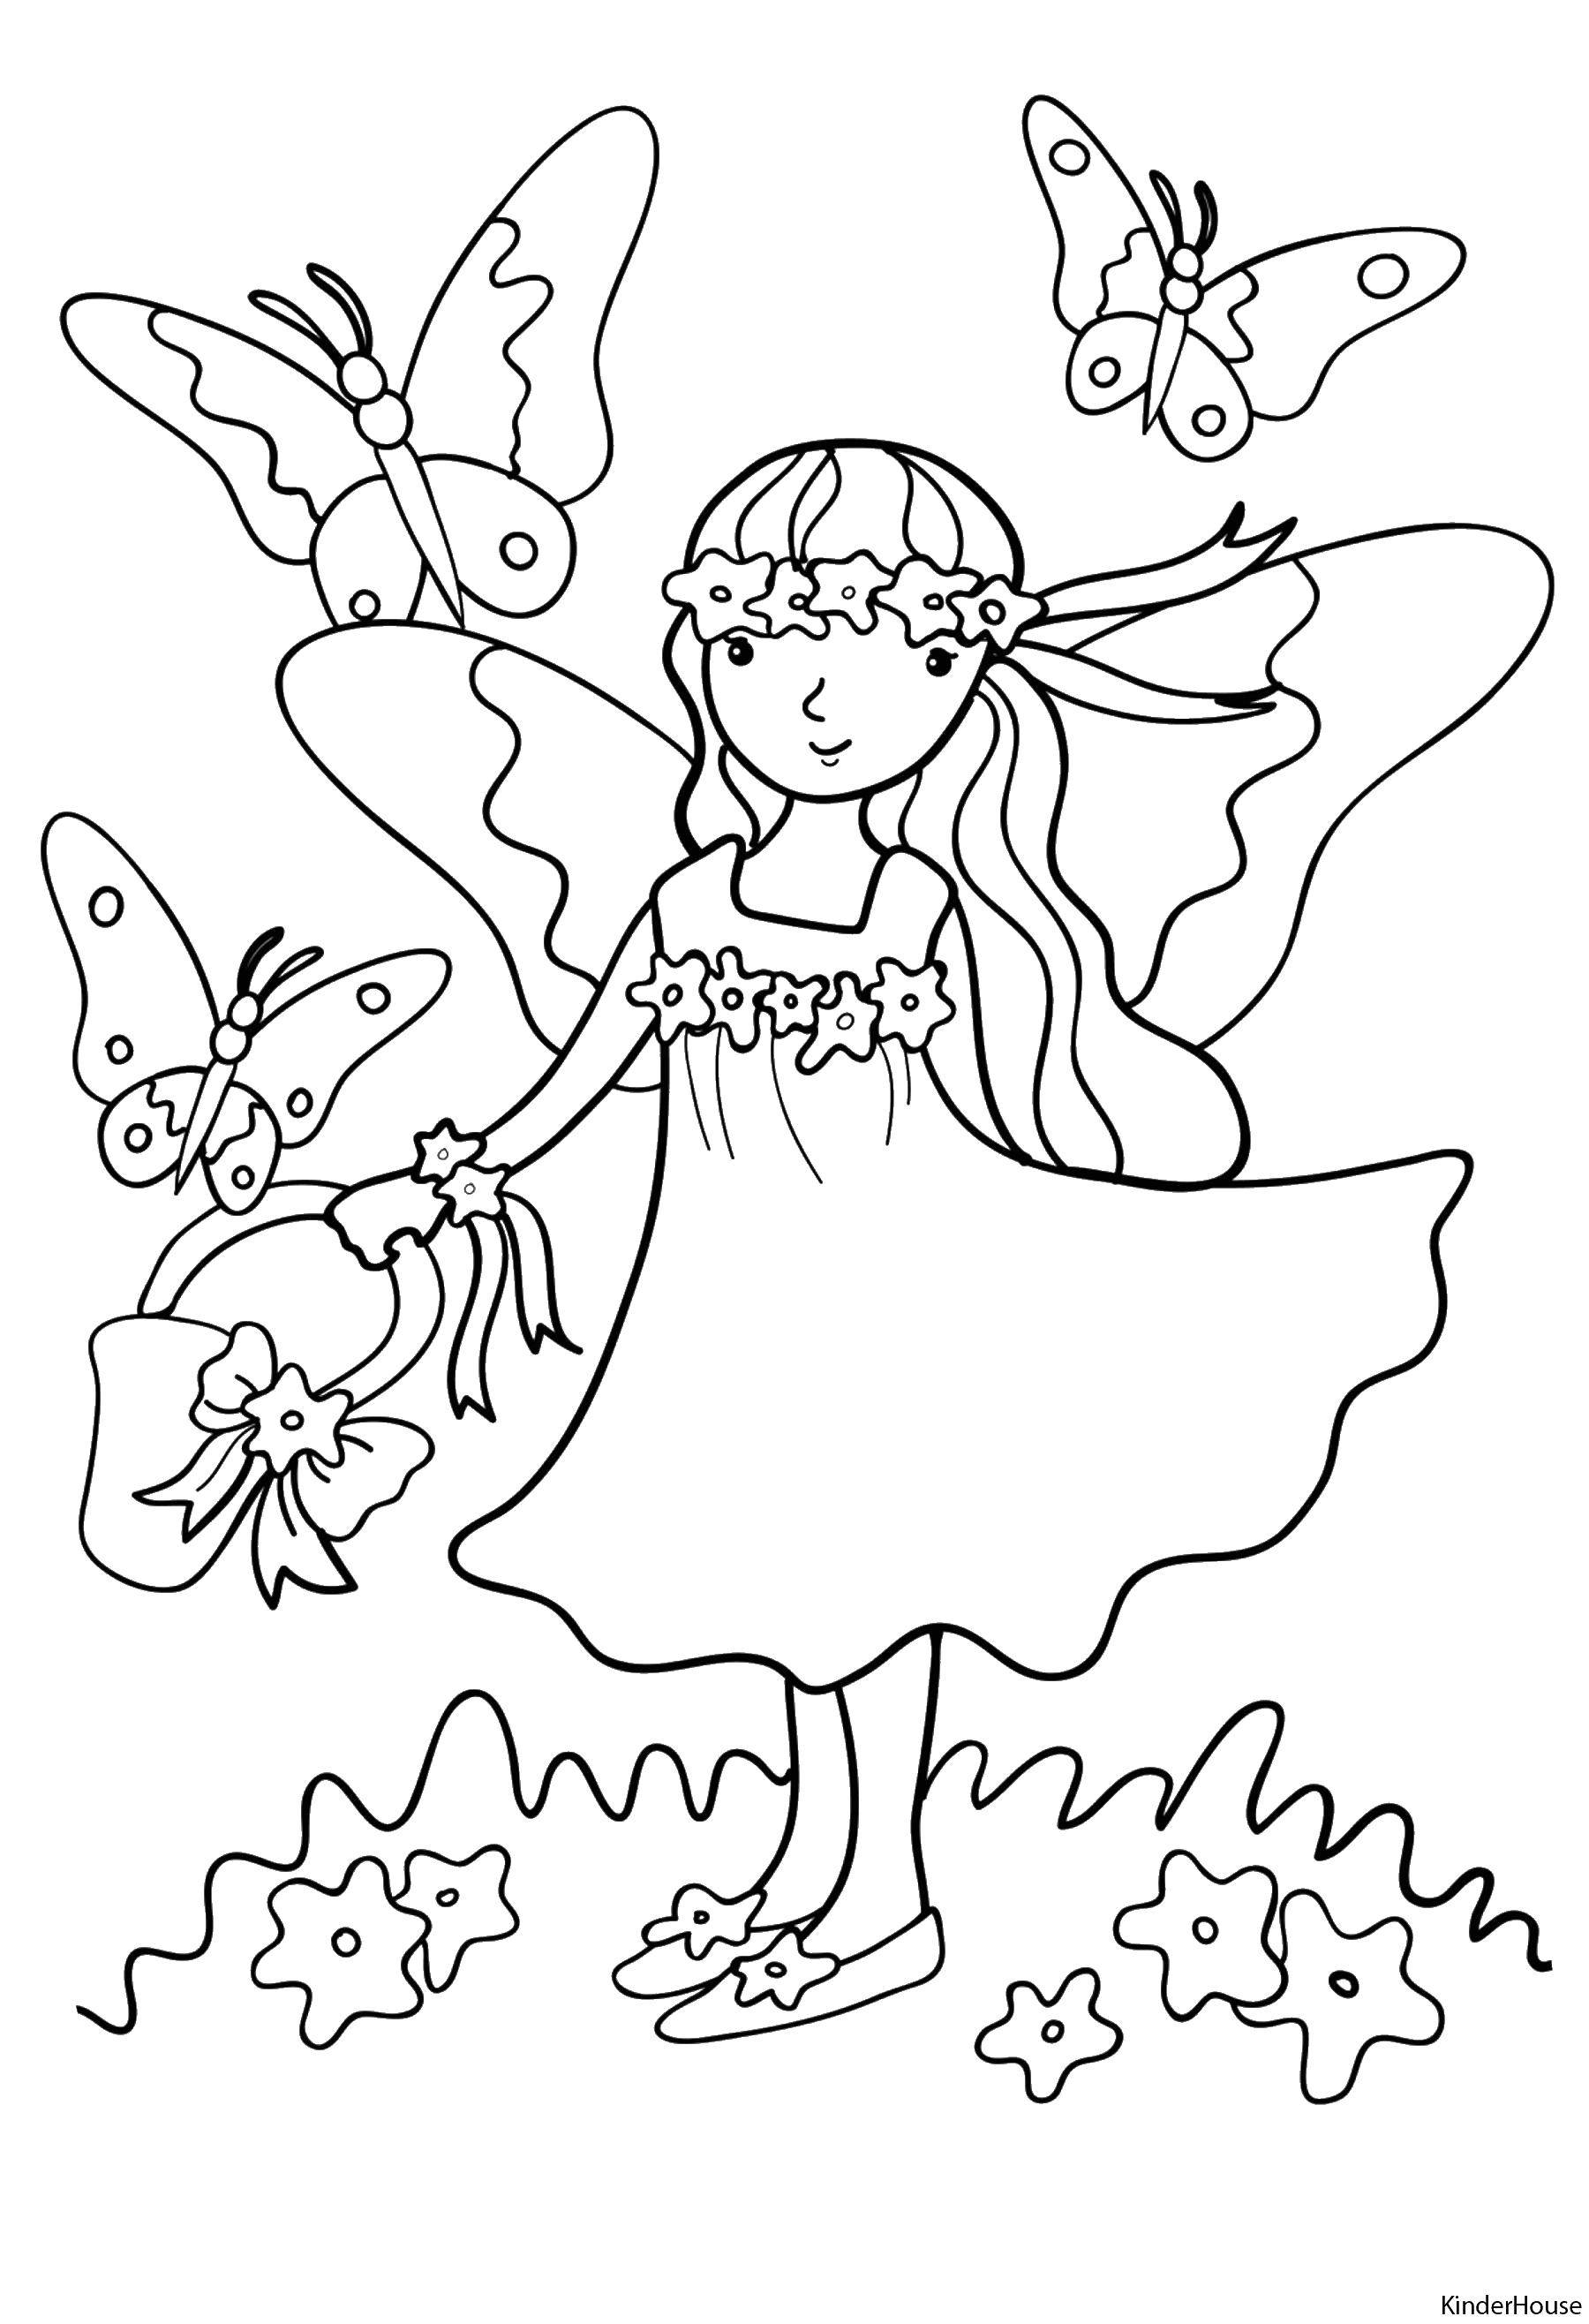 Coloring Girl and butterflies. Category For girls. Tags:  girl , dress, basket, butterfly.